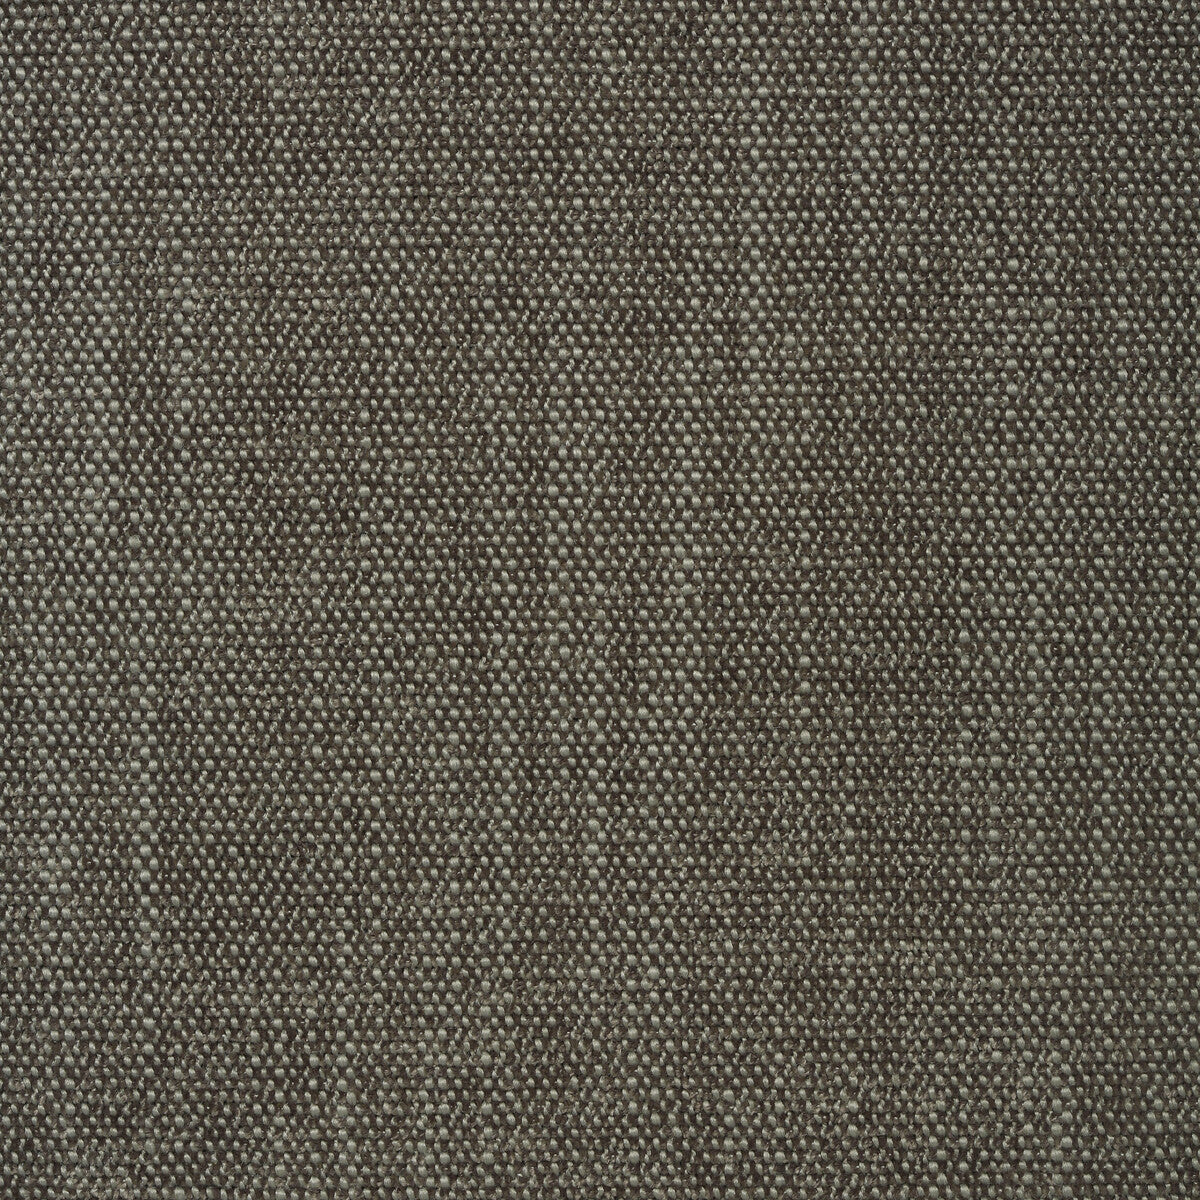 Kravet Smart fabric in 35113-21 color - pattern 35113.21.0 - by Kravet Smart in the Performance Crypton Home collection